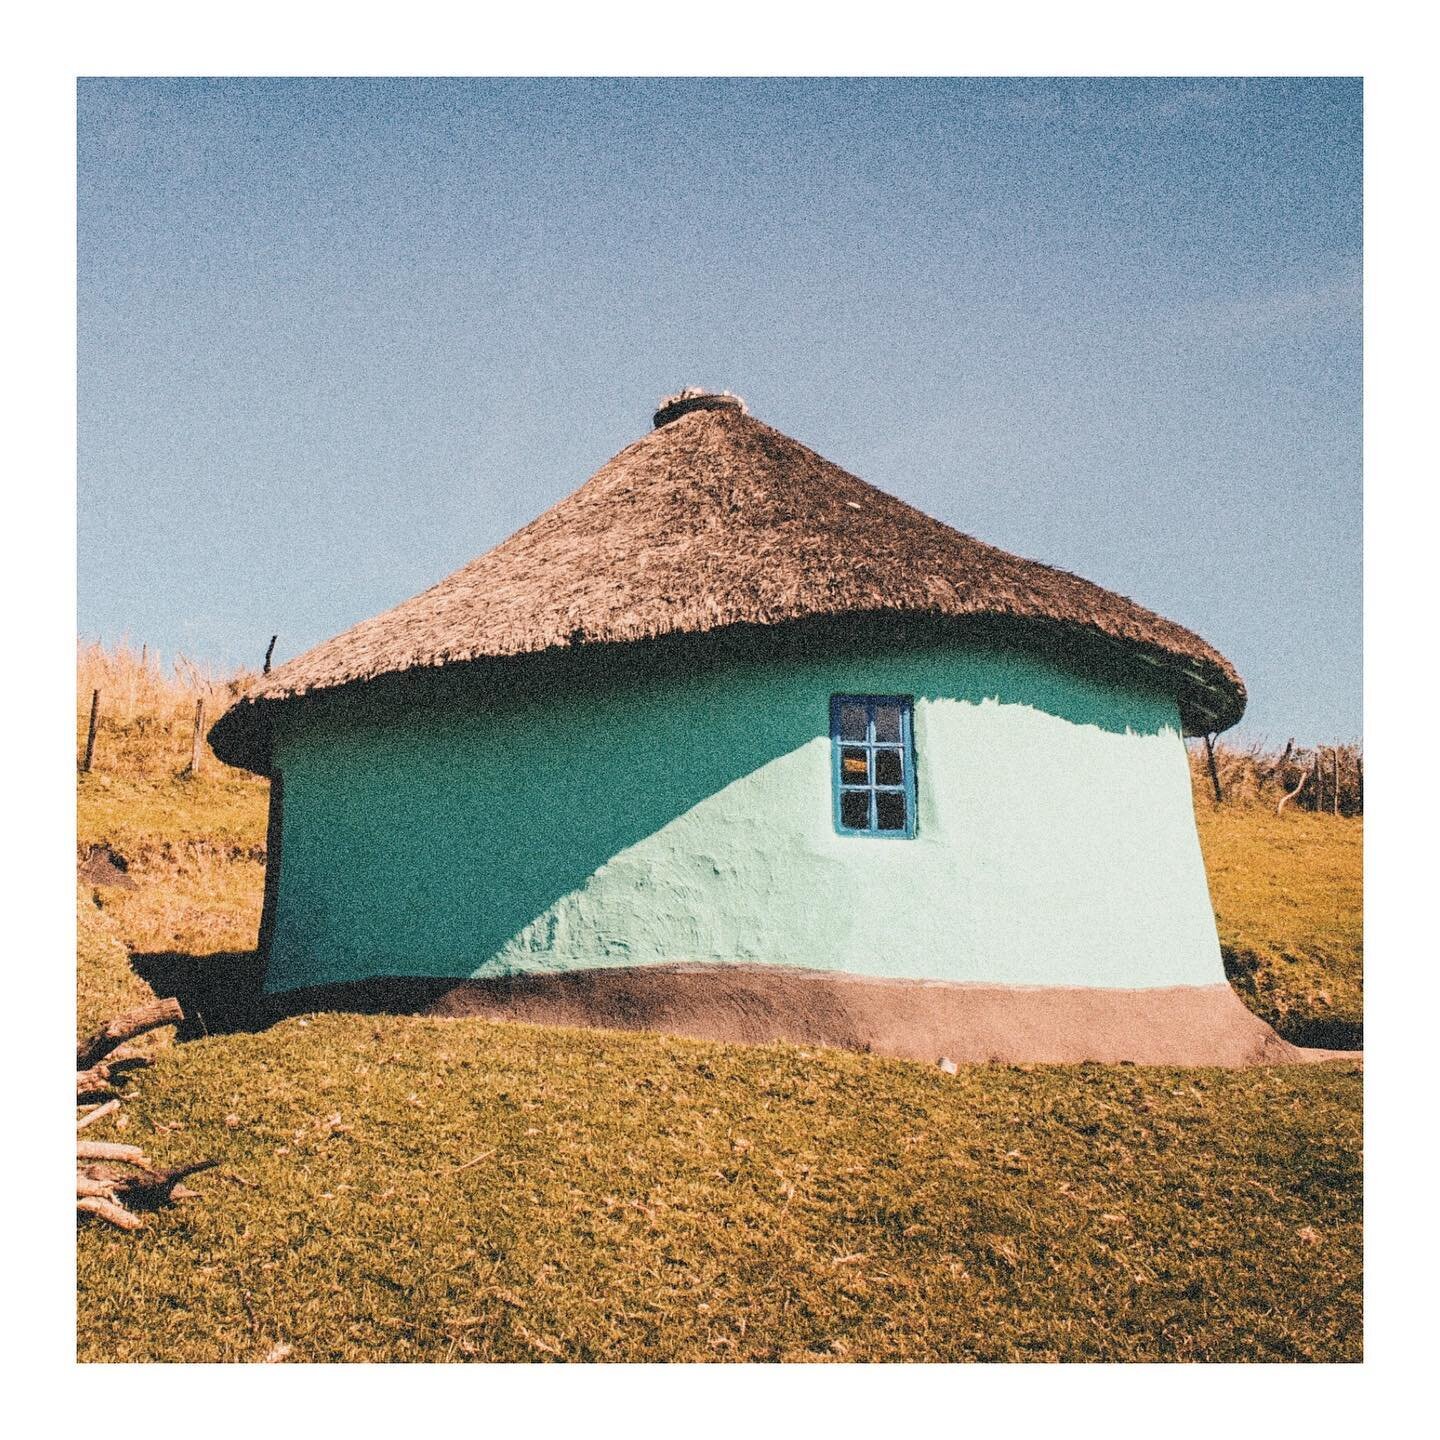 Scattered across the hills, these beautifully unique Xhosa huts, also known as Rondavels, live. Though you may see them differ from country to country, these are unique to the Xhosa due to their colour, shape and thatch design 🌾
If you ever visit #s